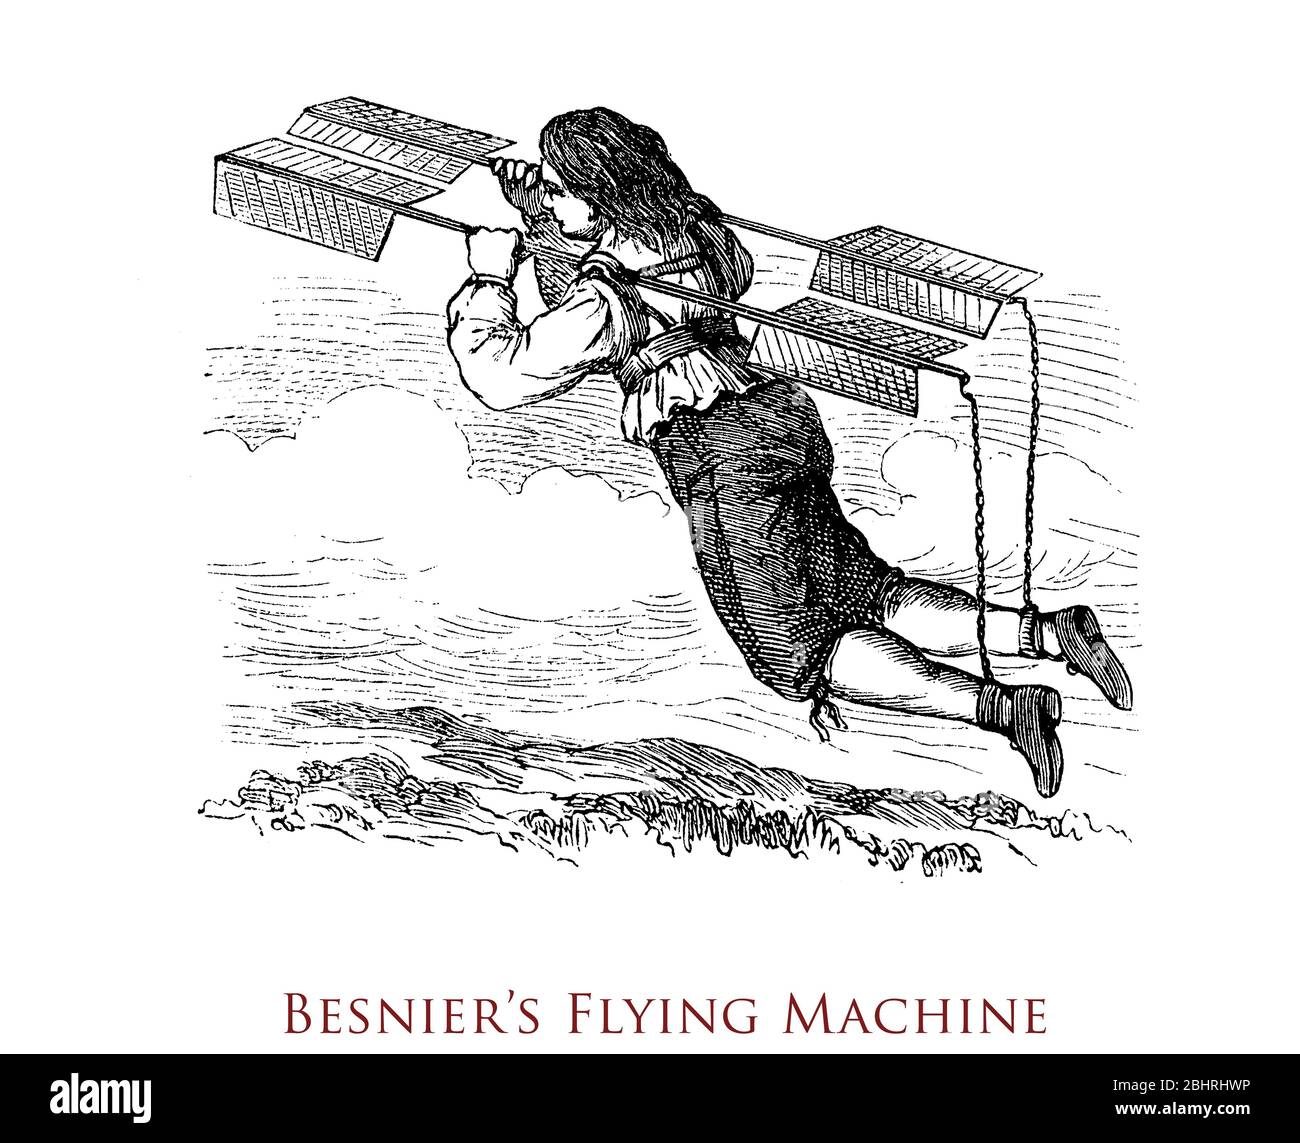 Besnier's flying machine:Besnier, a French locksmith, successfully developed in 1678 a flying apparatus based on the flapping principle used by birds remaining airborne for a surprisingly long time Stock Photo